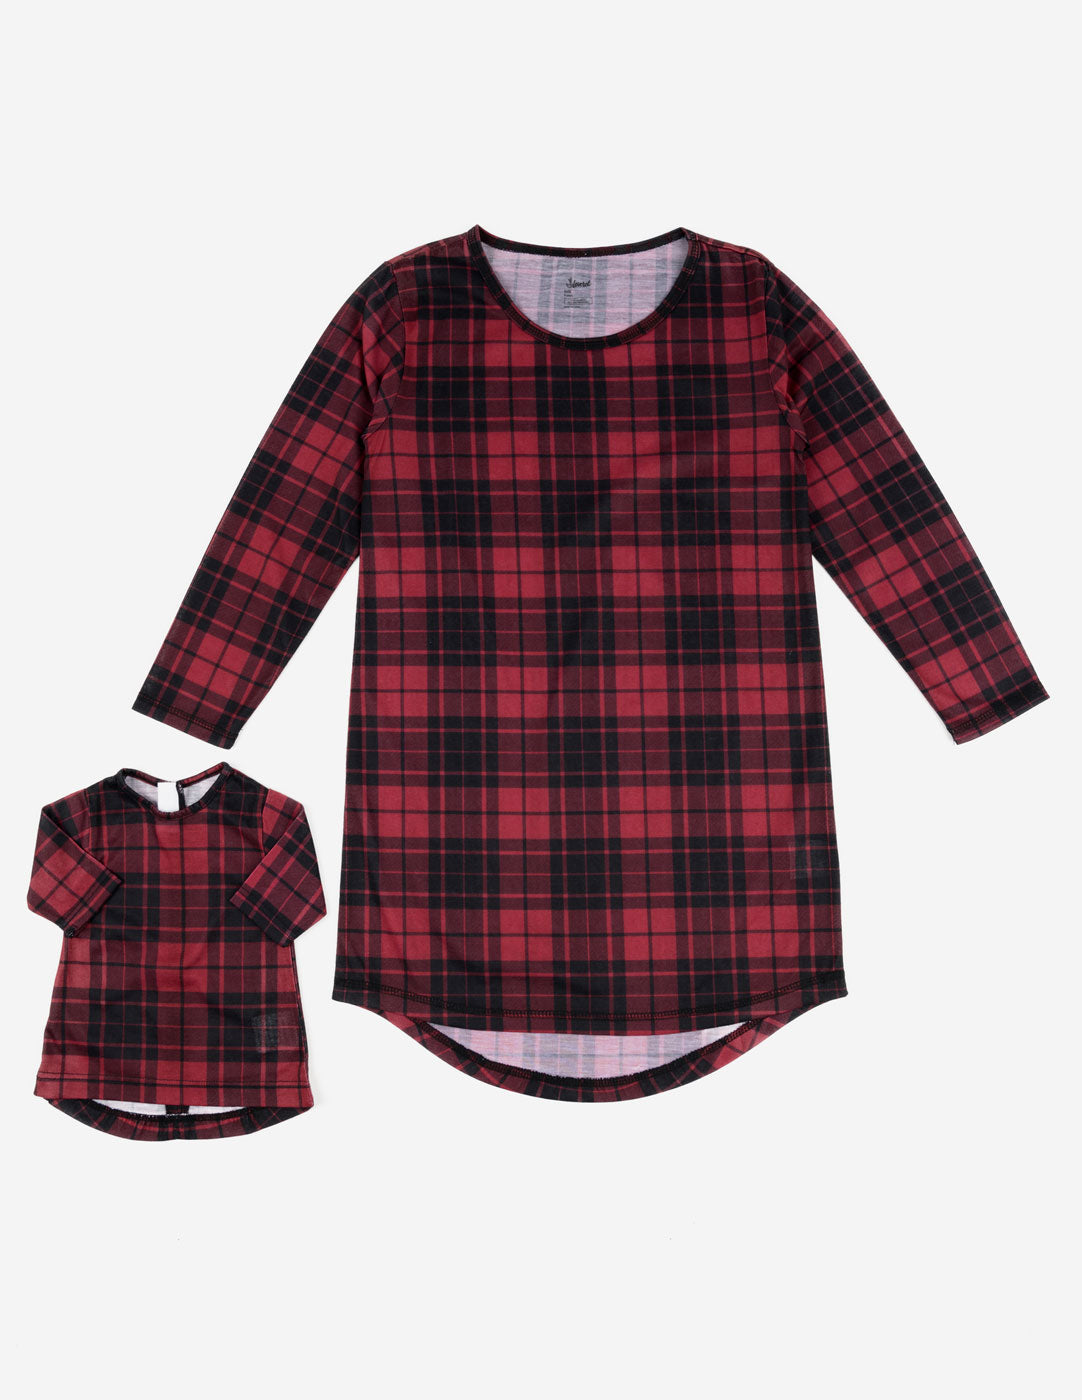 red and black plaid girl and doll nightgown